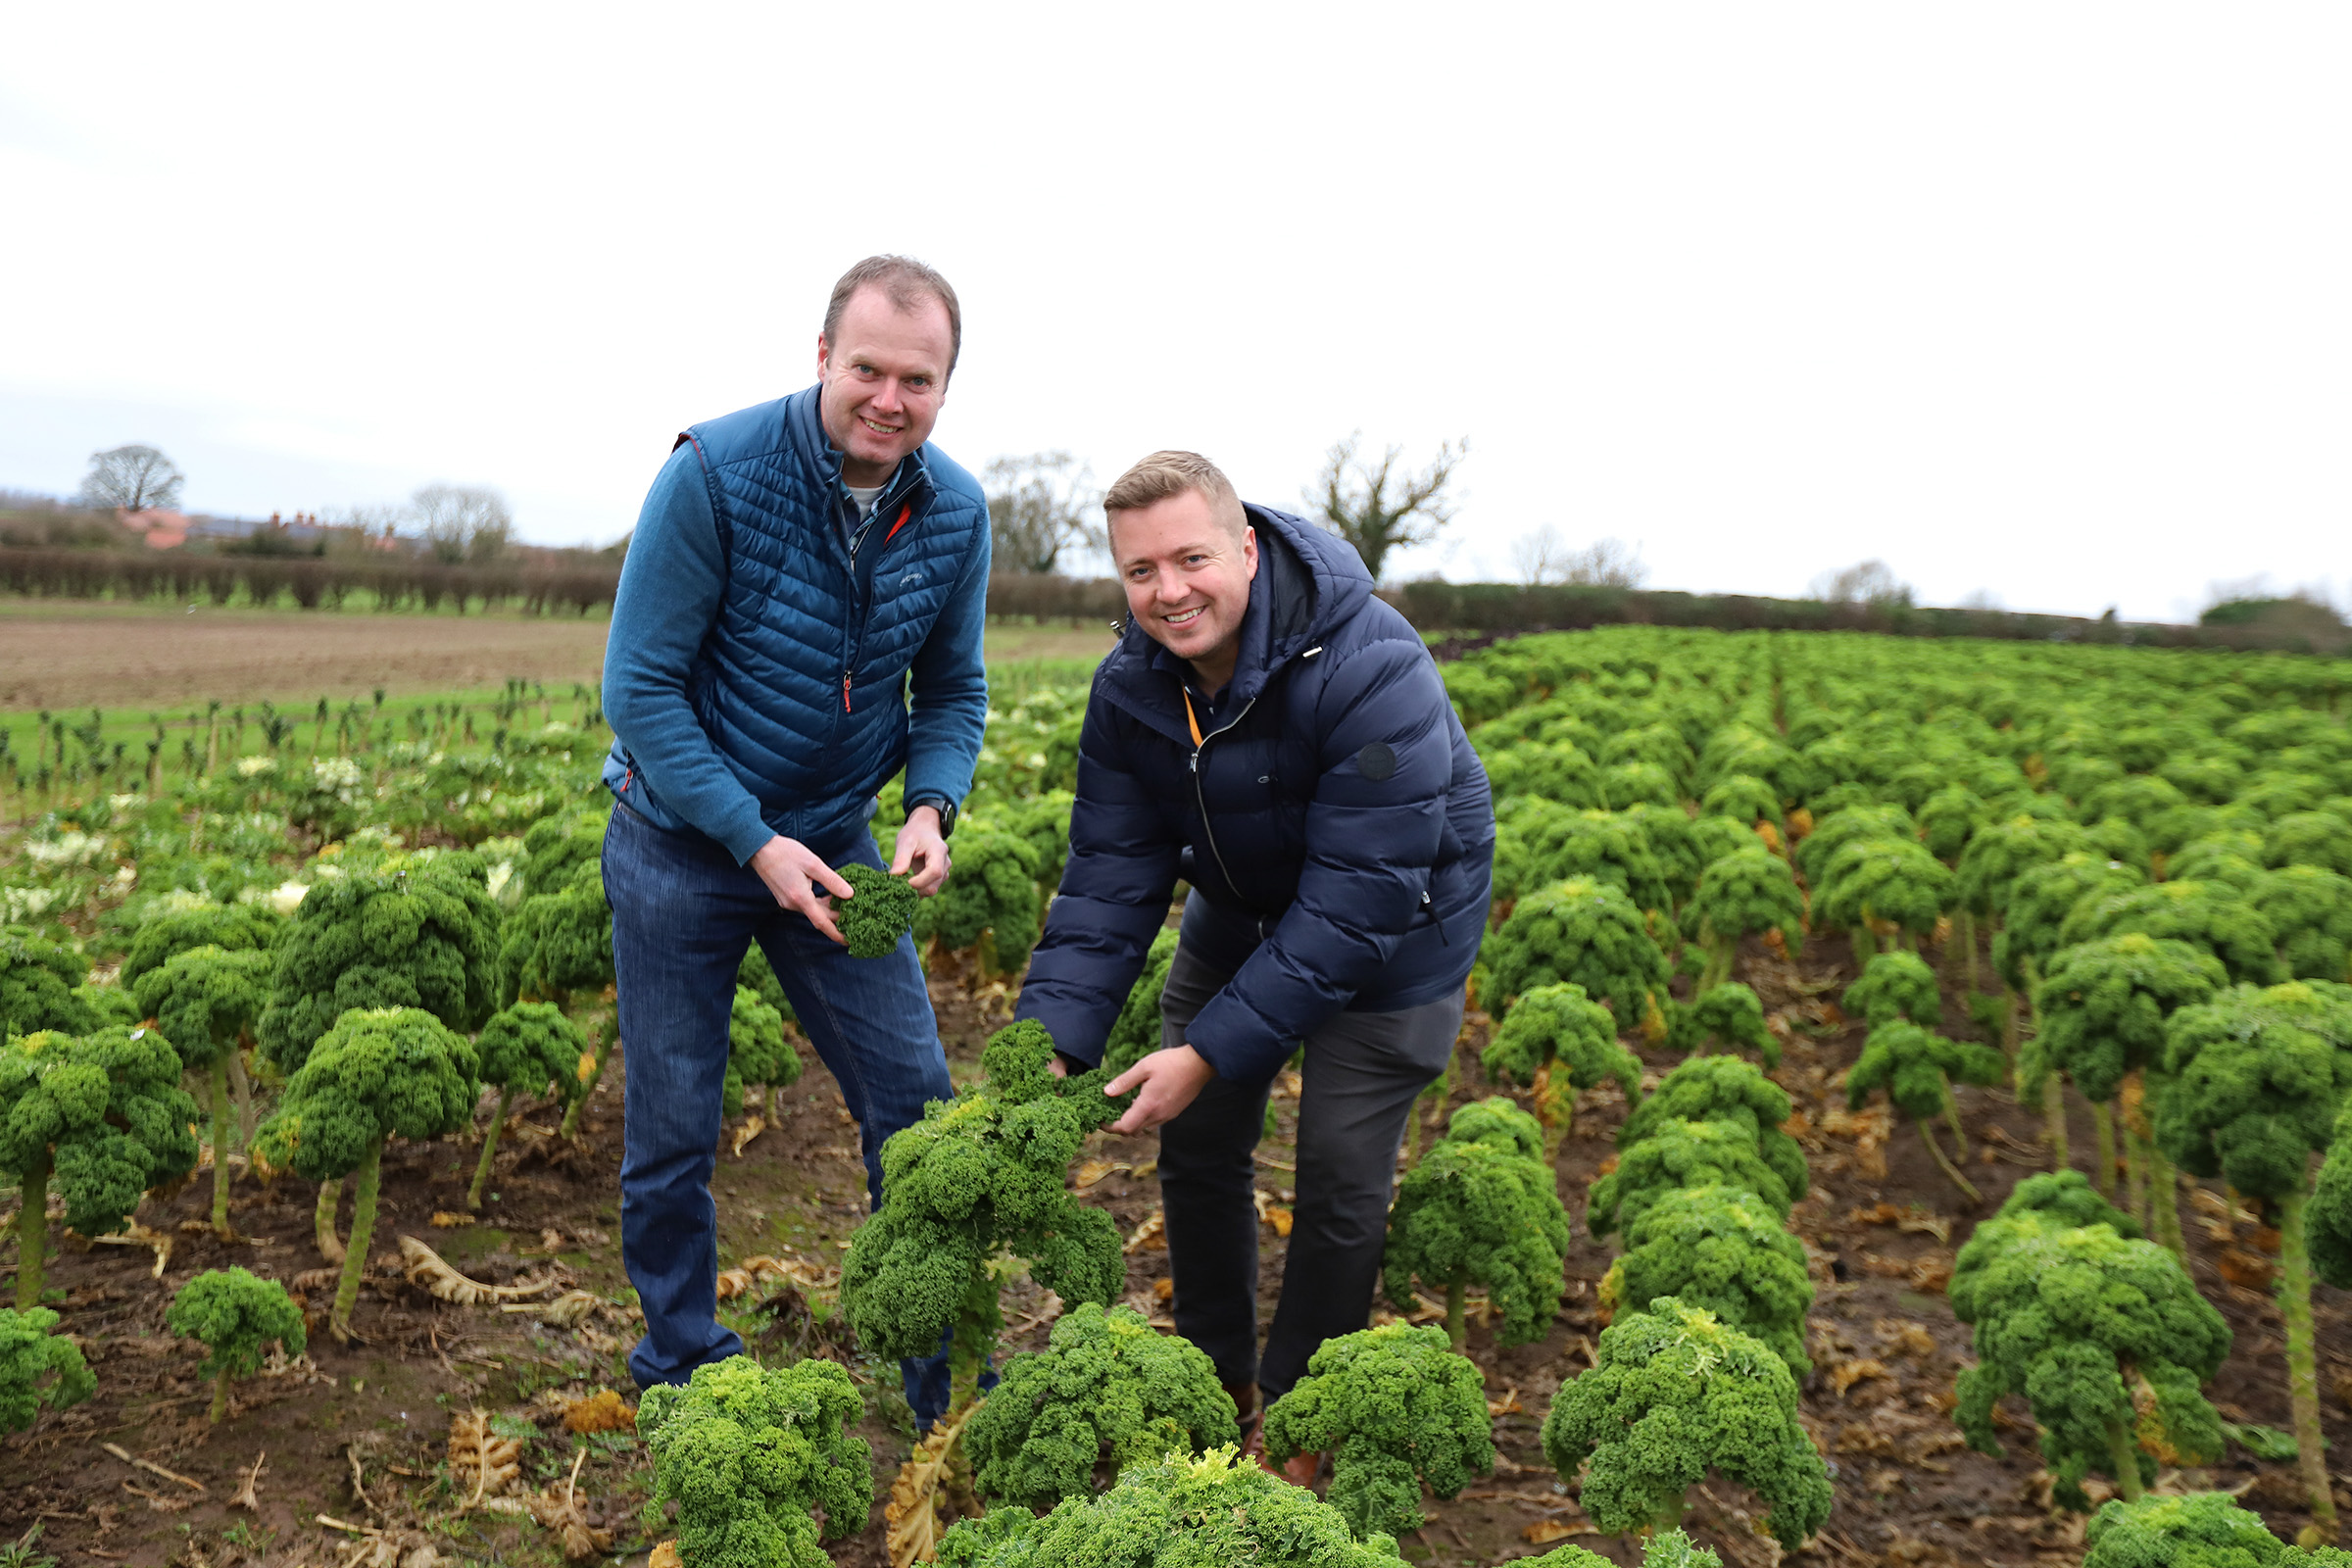 Philip Dodd, Managing Director of Herbs Unlimited, and Wilf Whittle, Fresh Trading Manager at James Hall & Co. Ltd, look at the curly kale which is on sale in SPAR North of England stores.